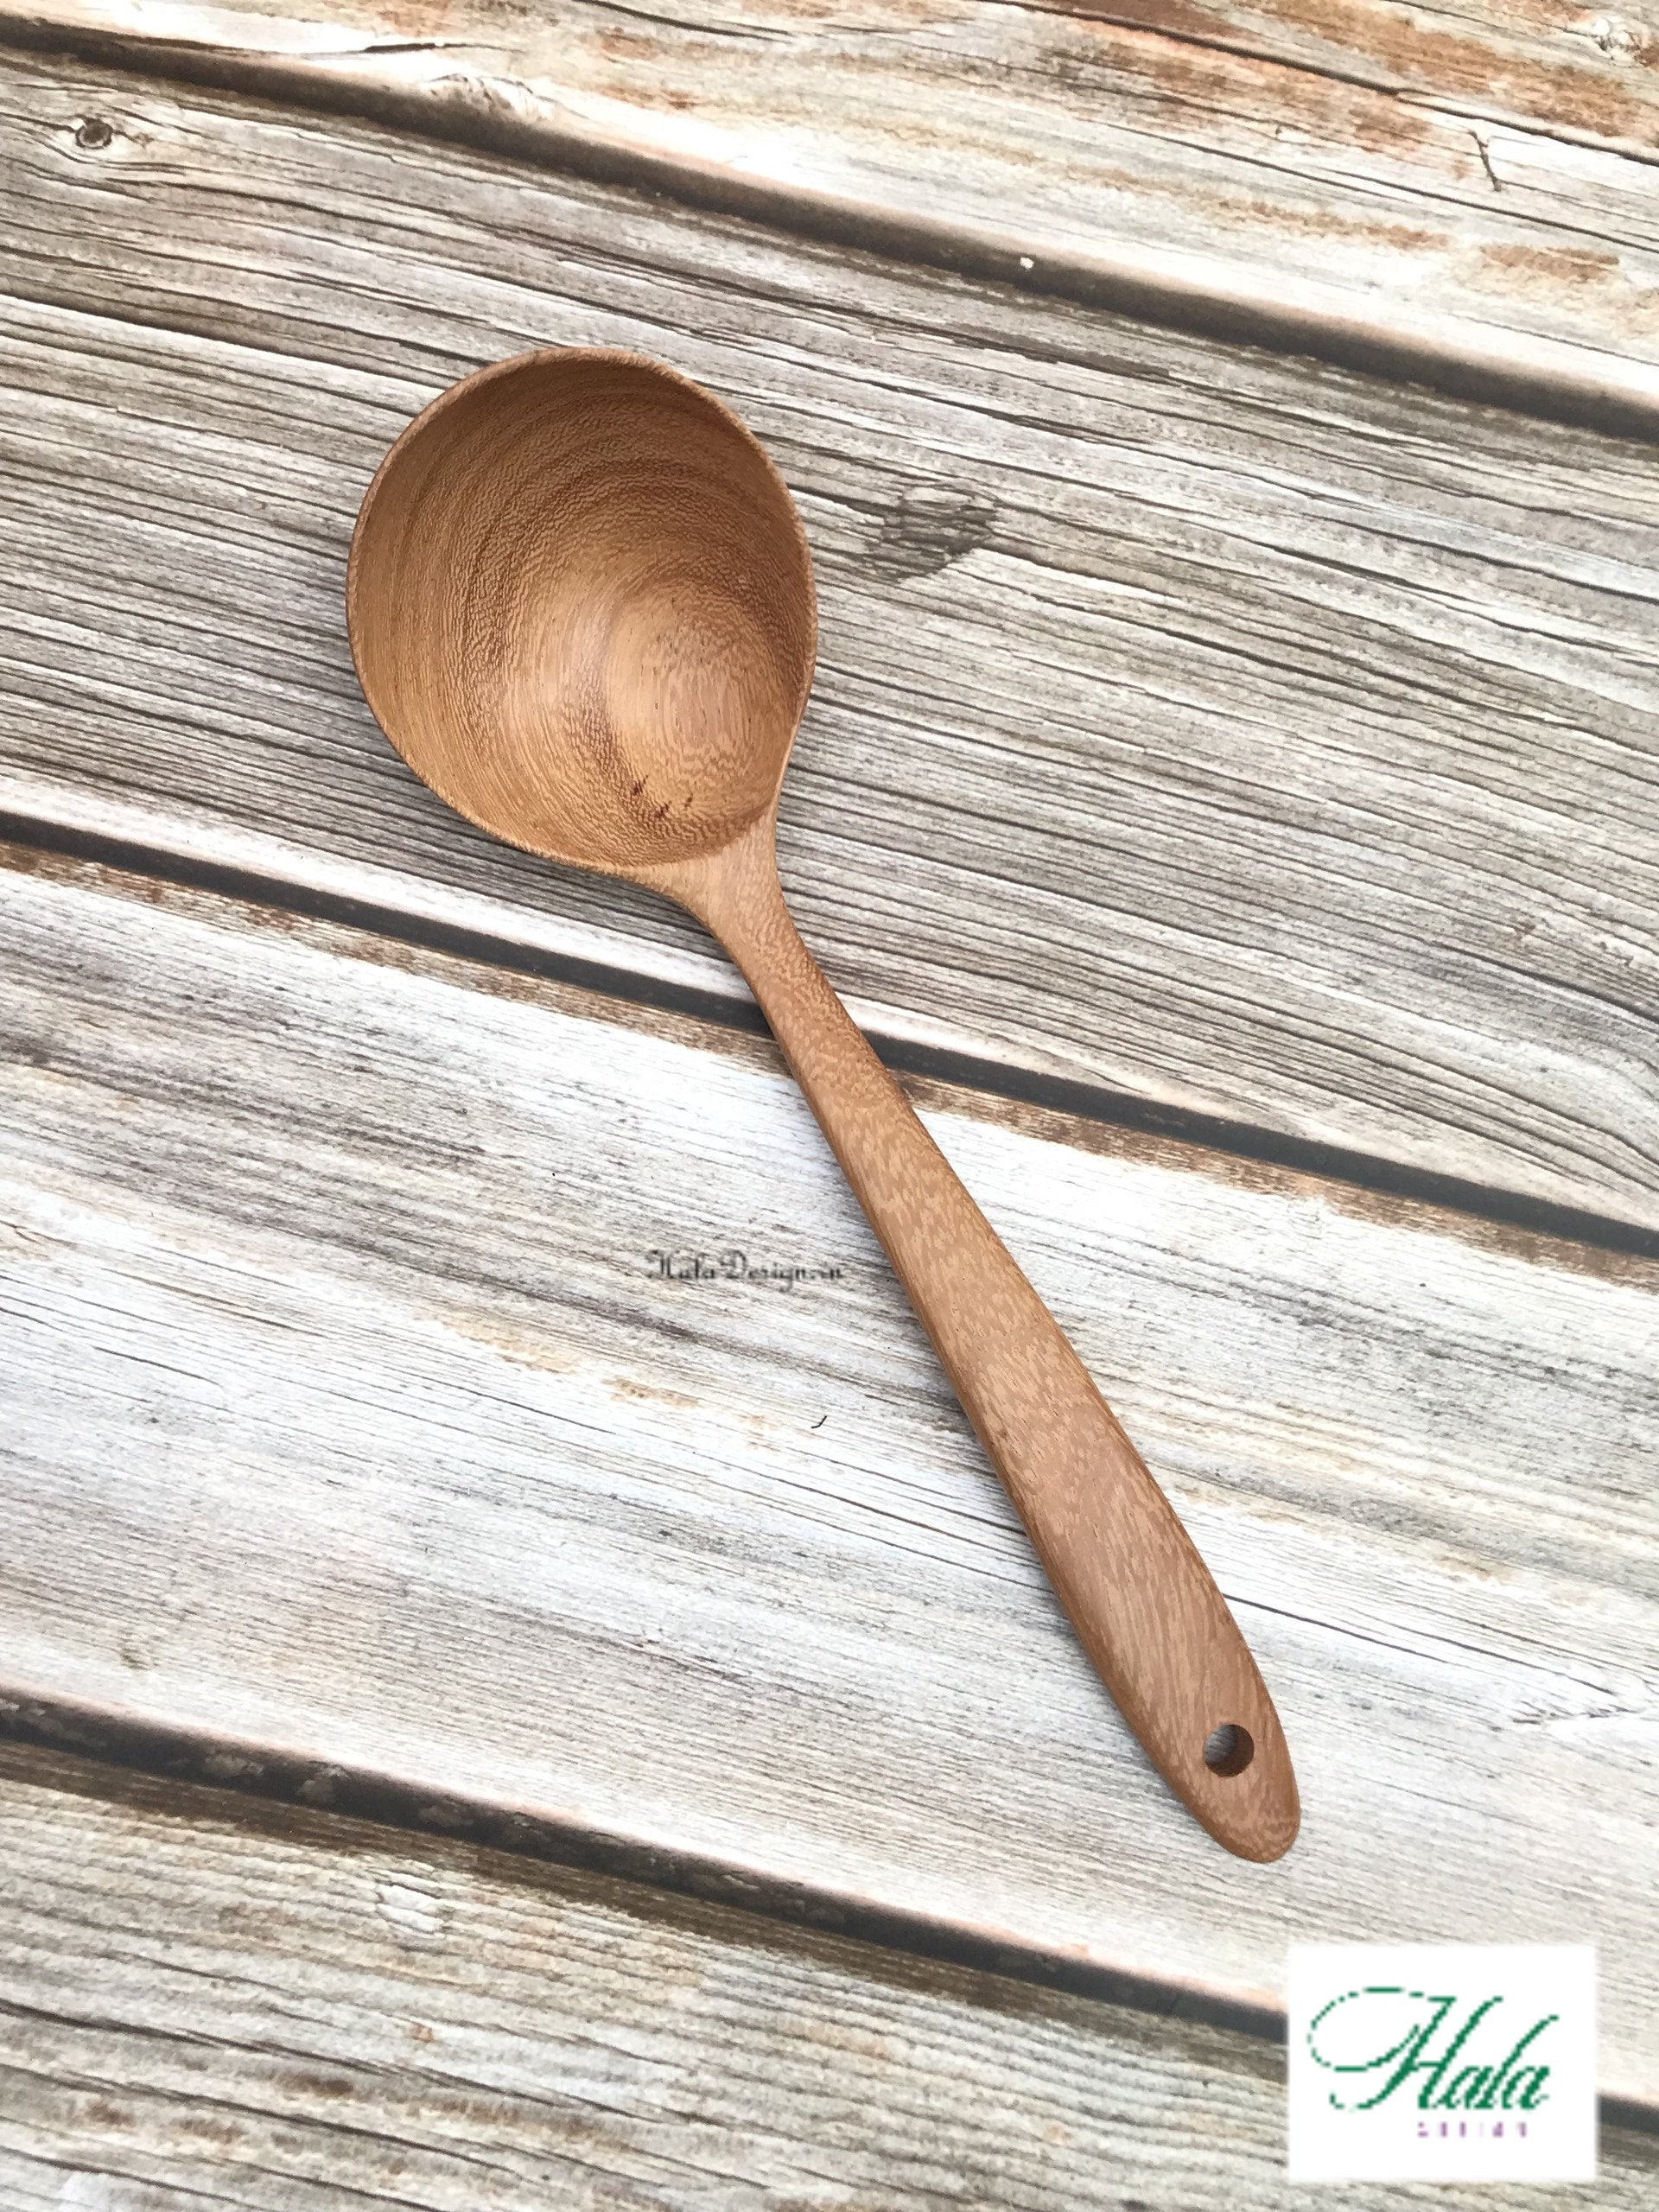 Wooden Mixing Spoon, 16.5 Inch Giant Wood Spoon, Long Handled Wooden Spoon